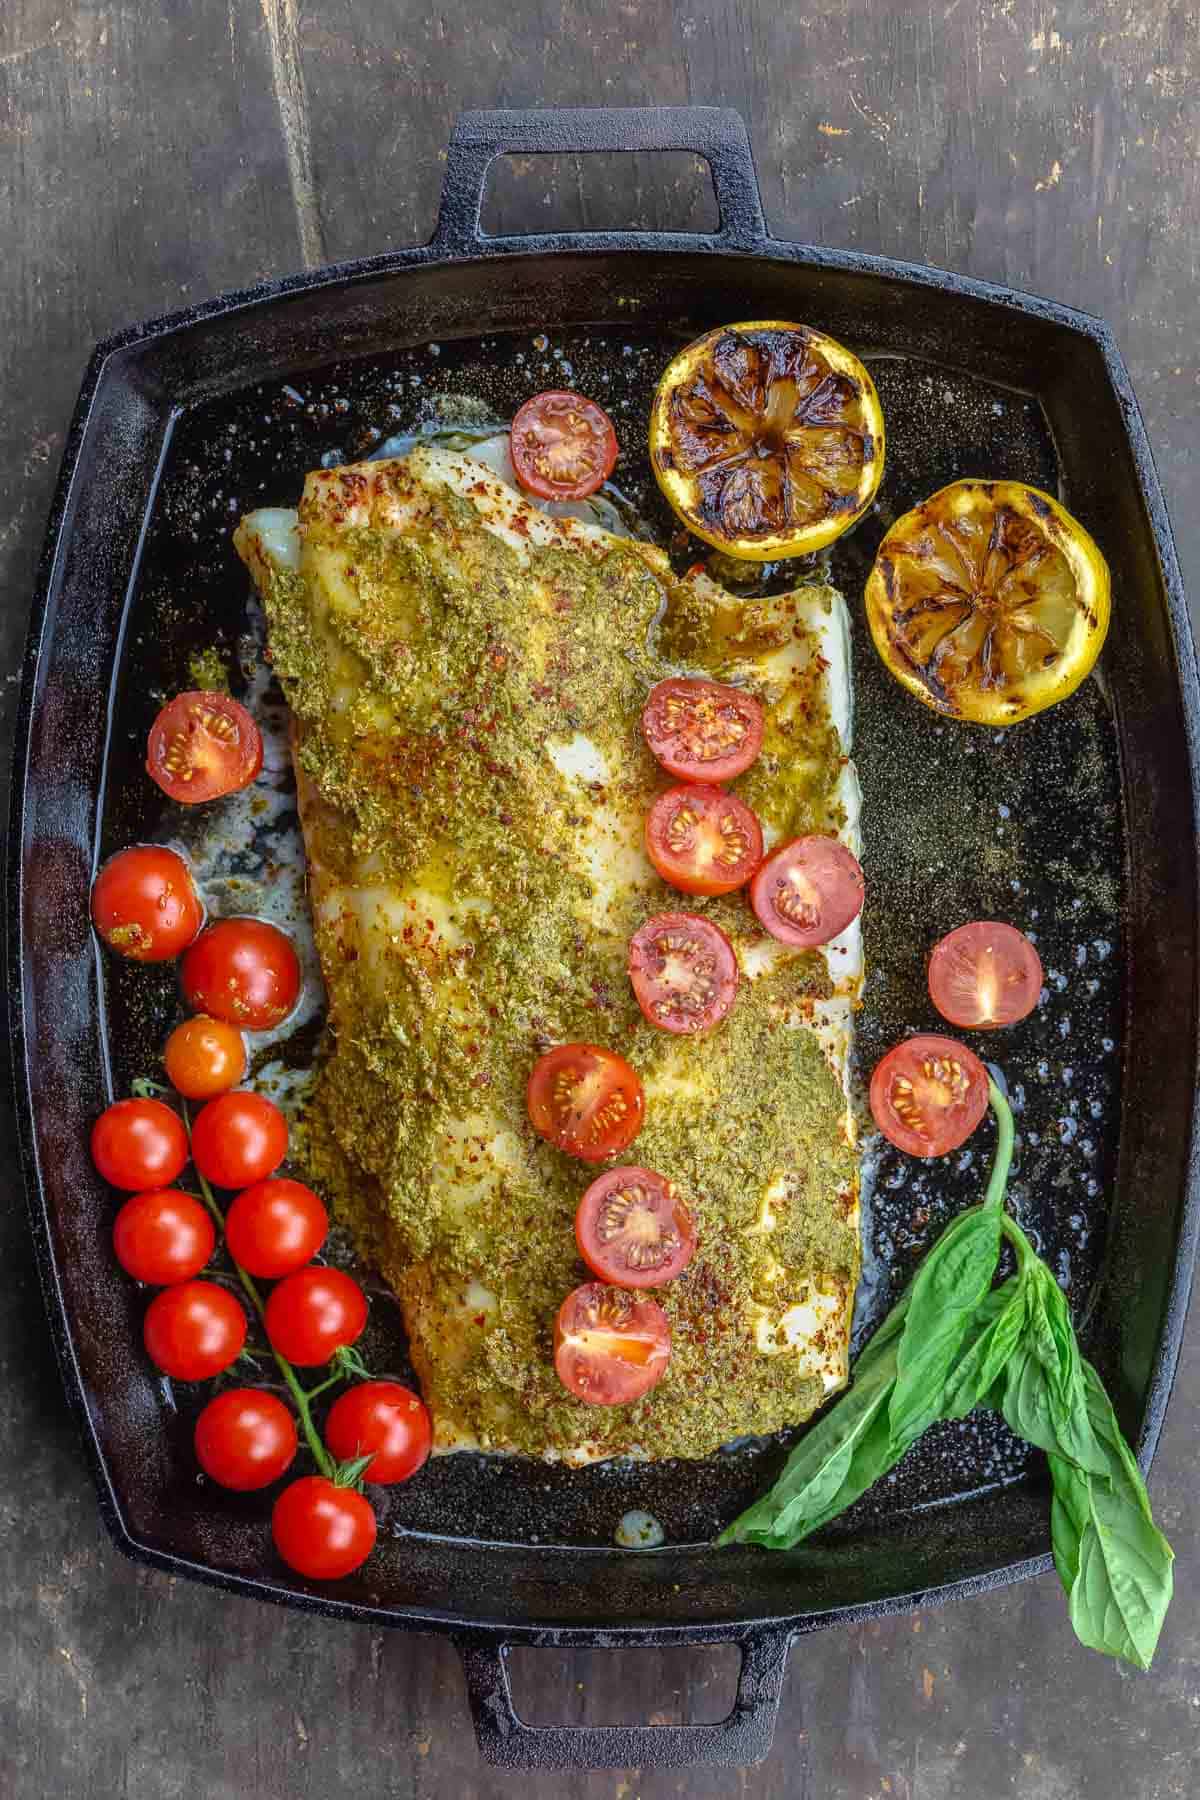 baked Chilean sea bass with basil pesto in a large cast-iron baking dish. Topped with cherry tomatoes, with a sprig of fresh basil on the side